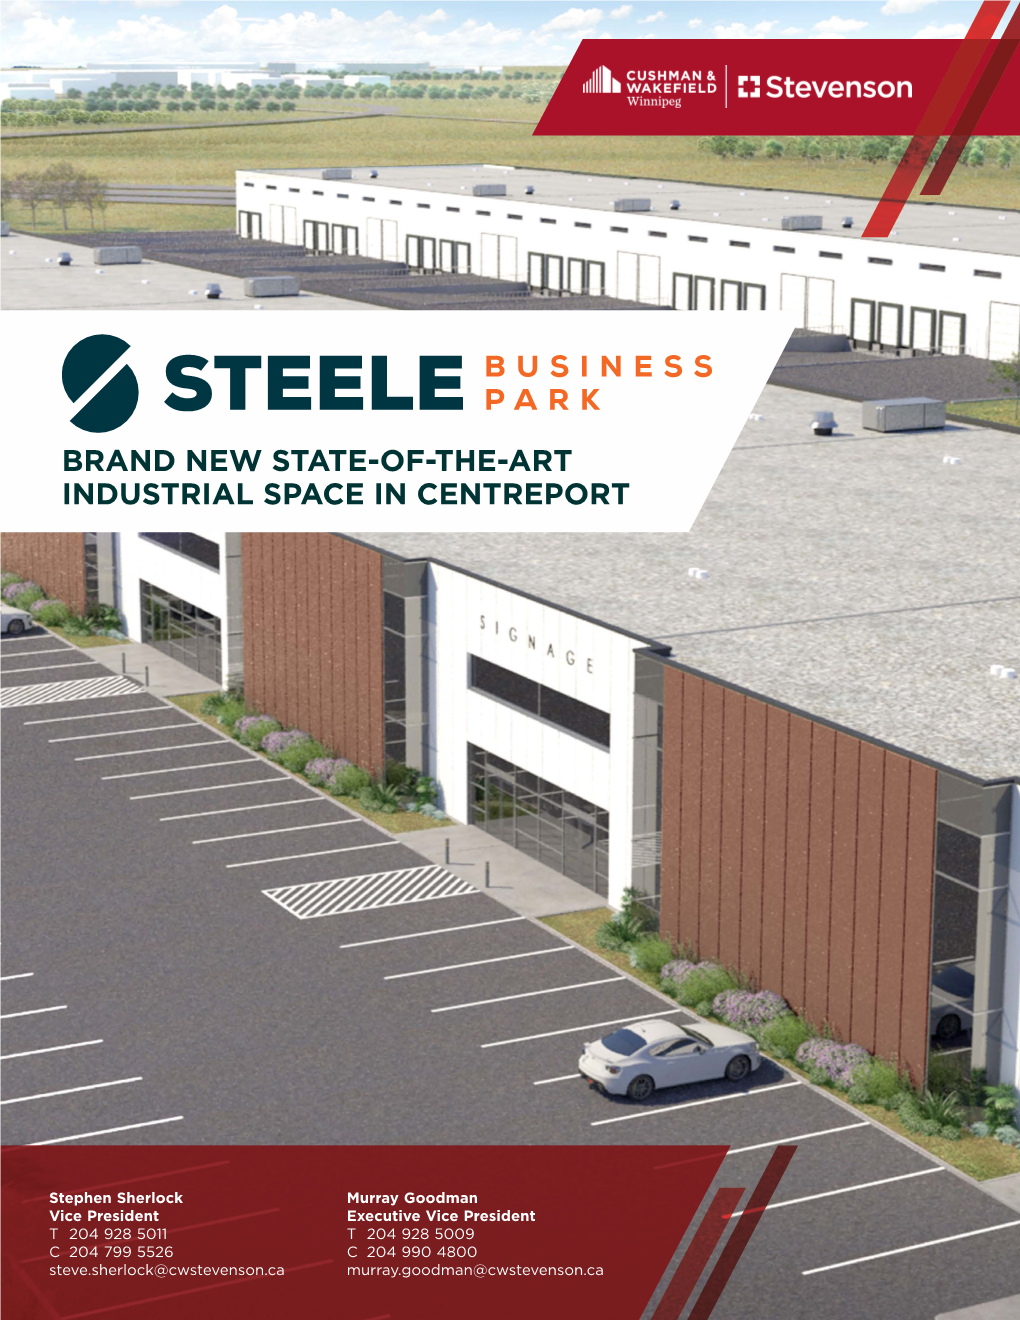 Brand New State-Of-The-Art Industrial Space in Centreport